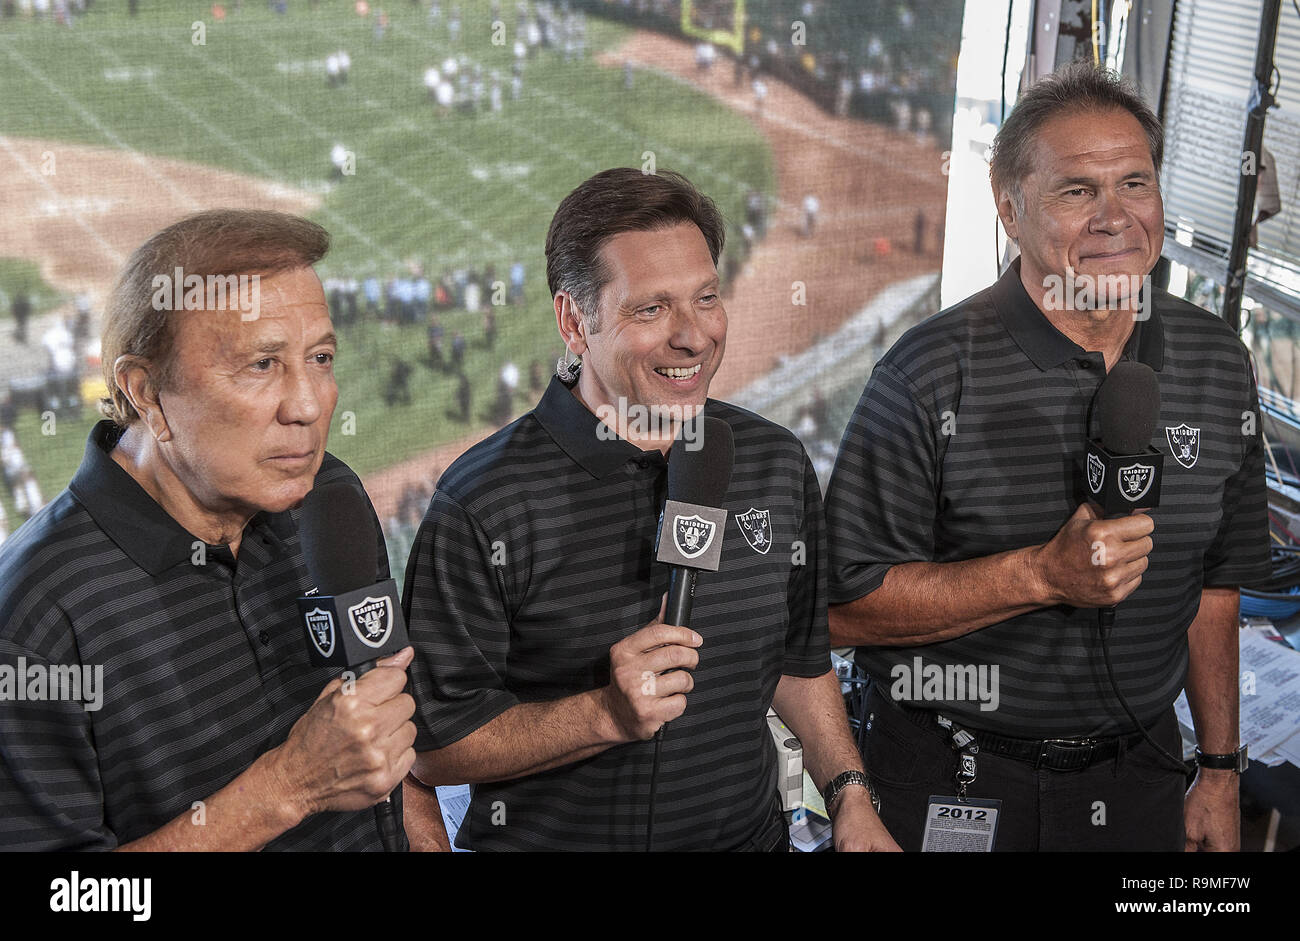 Oakland, California, USA. 25th Aug, 2012. Tom Flores, Greg Papa, Jim  Plunkett doing television spot before game on Saturday, August 25, 2012, in  Oakland California. Raiders defeated the Lions 31-20 in a